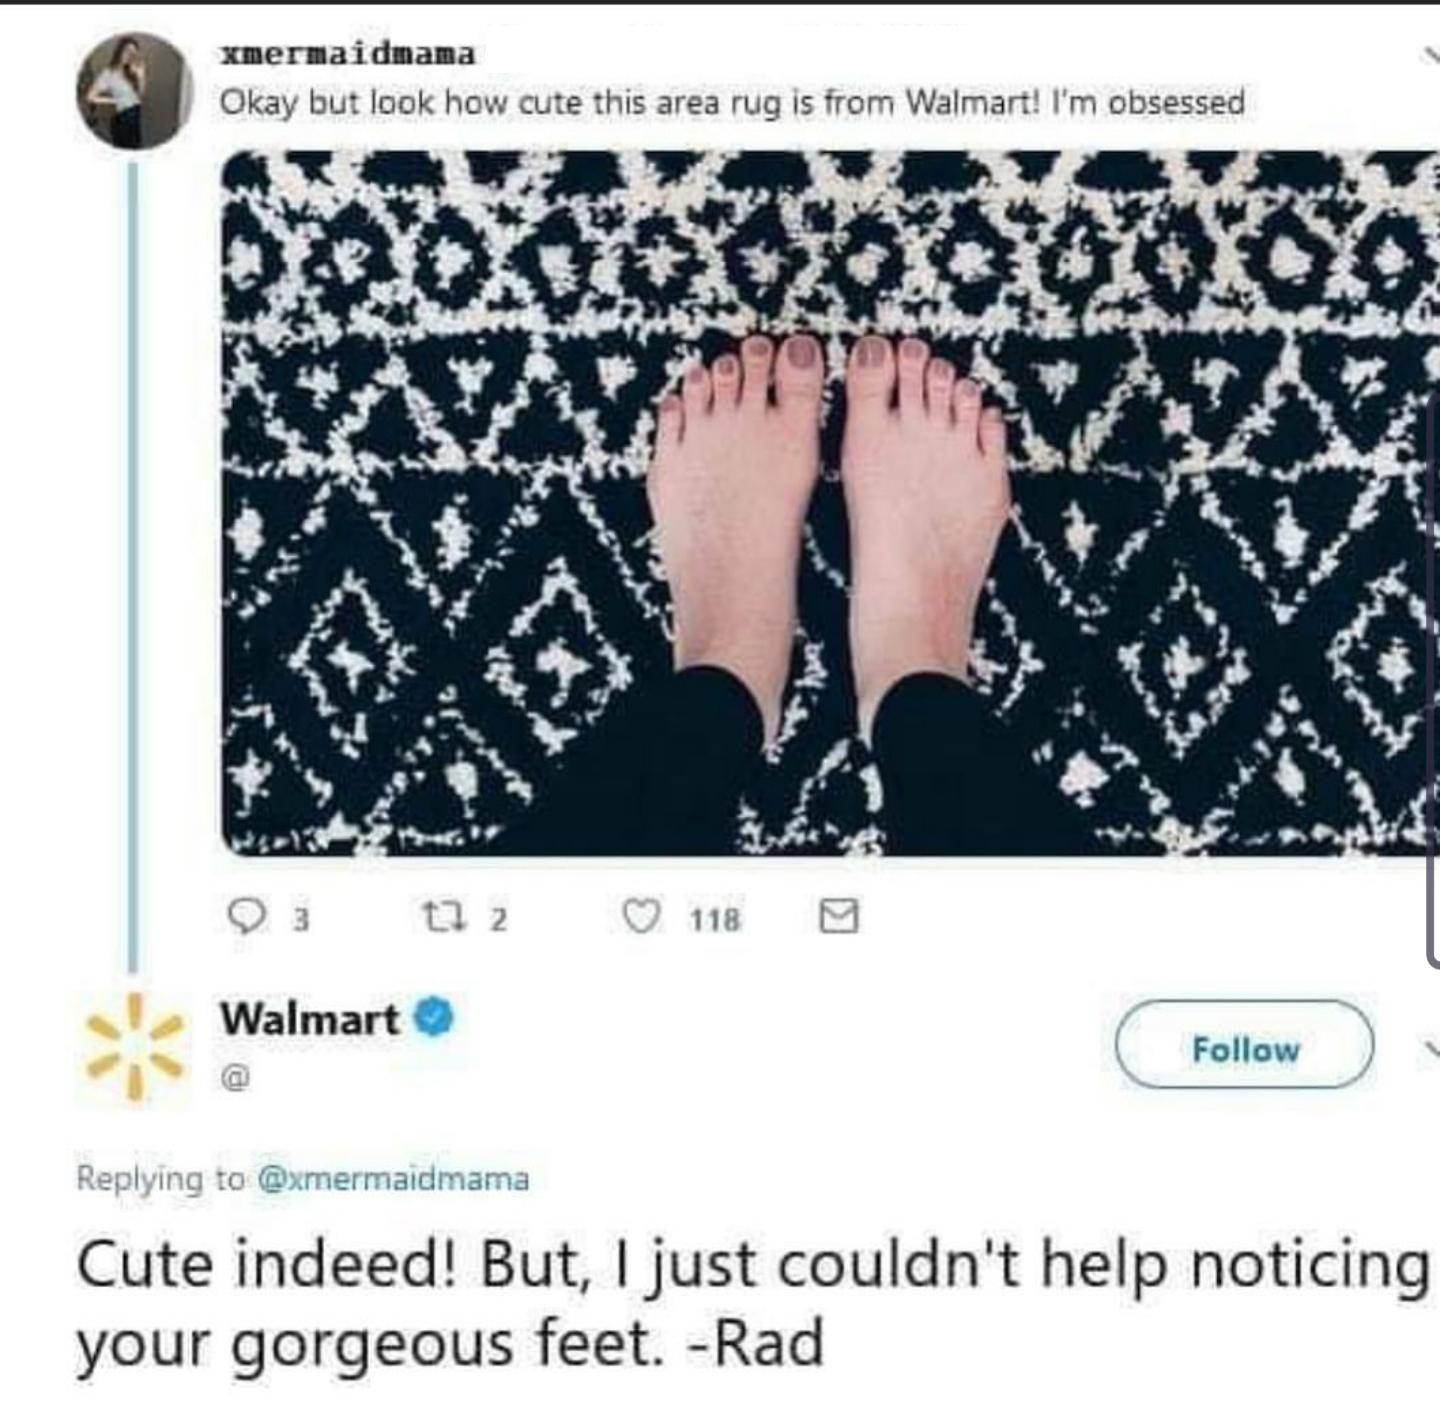 walmart feet tweet - xmermaidmama Okay but look how cute this area rug is from Walmart! I'm obsessed 23 12 118 Walmart Cute indeed! But, I just couldn't help noticing your gorgeous feet. Rad